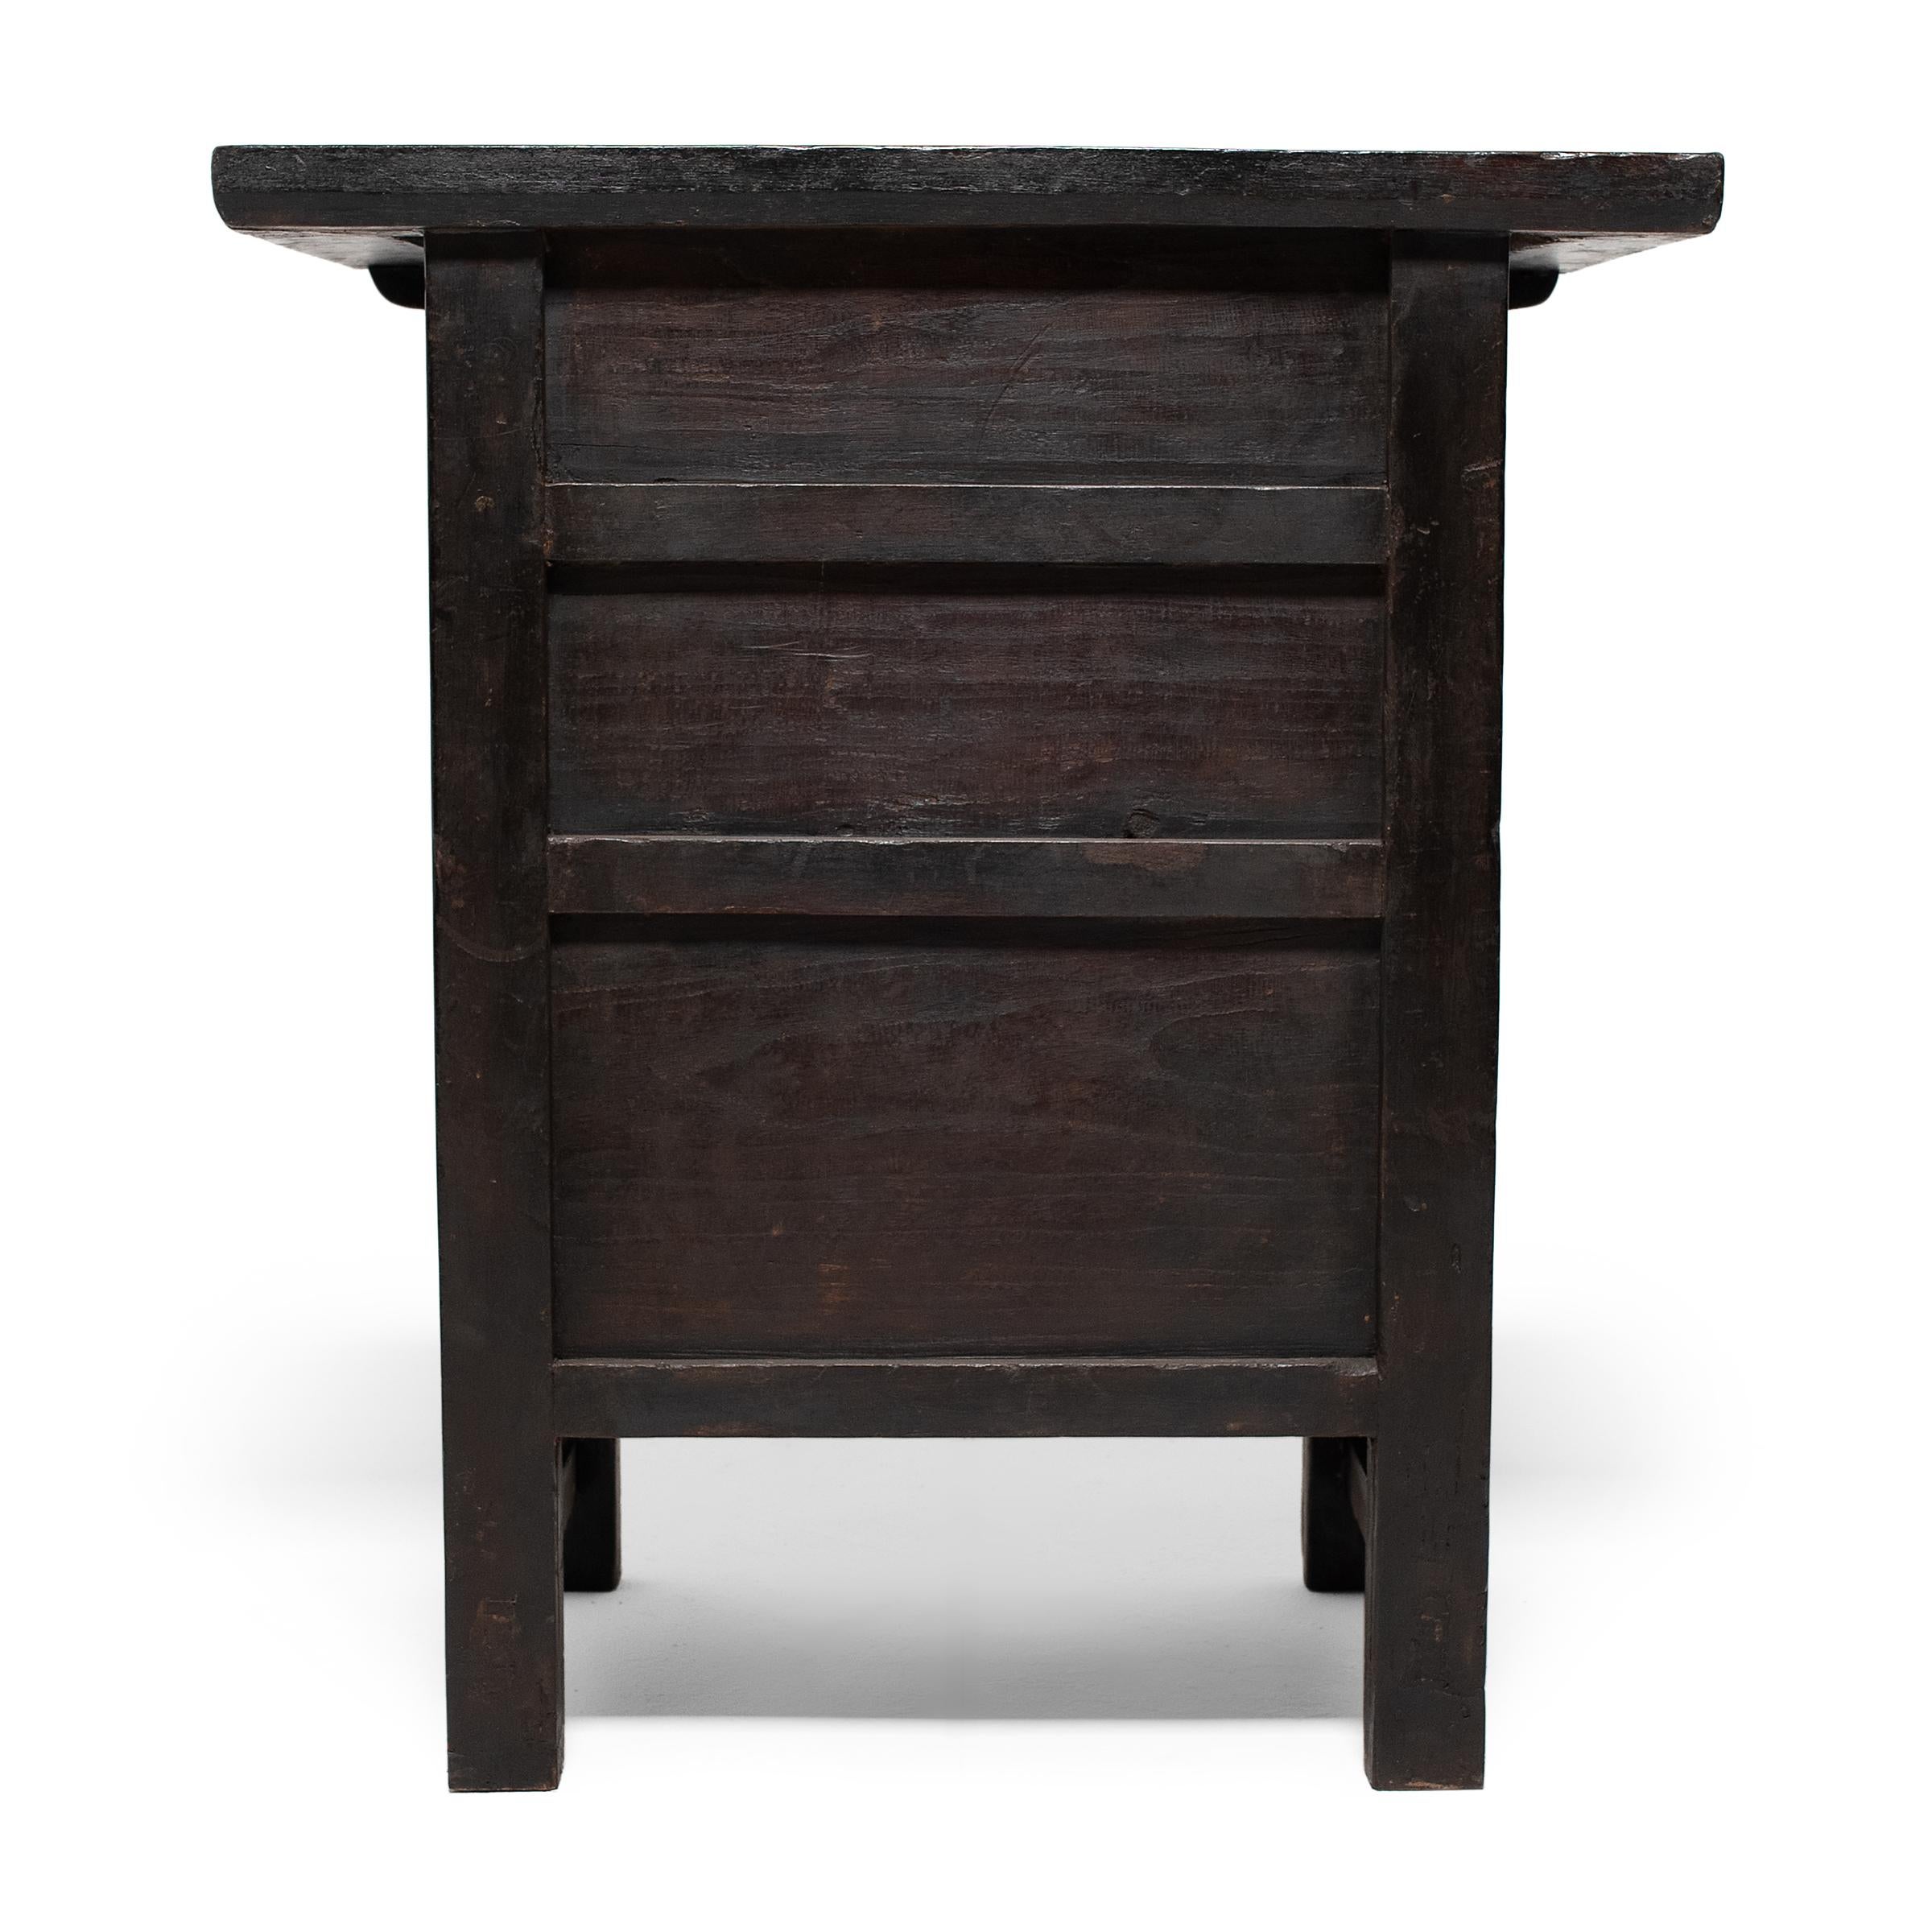 Qing Chinese Black Lacquer Display Table, c. 1850